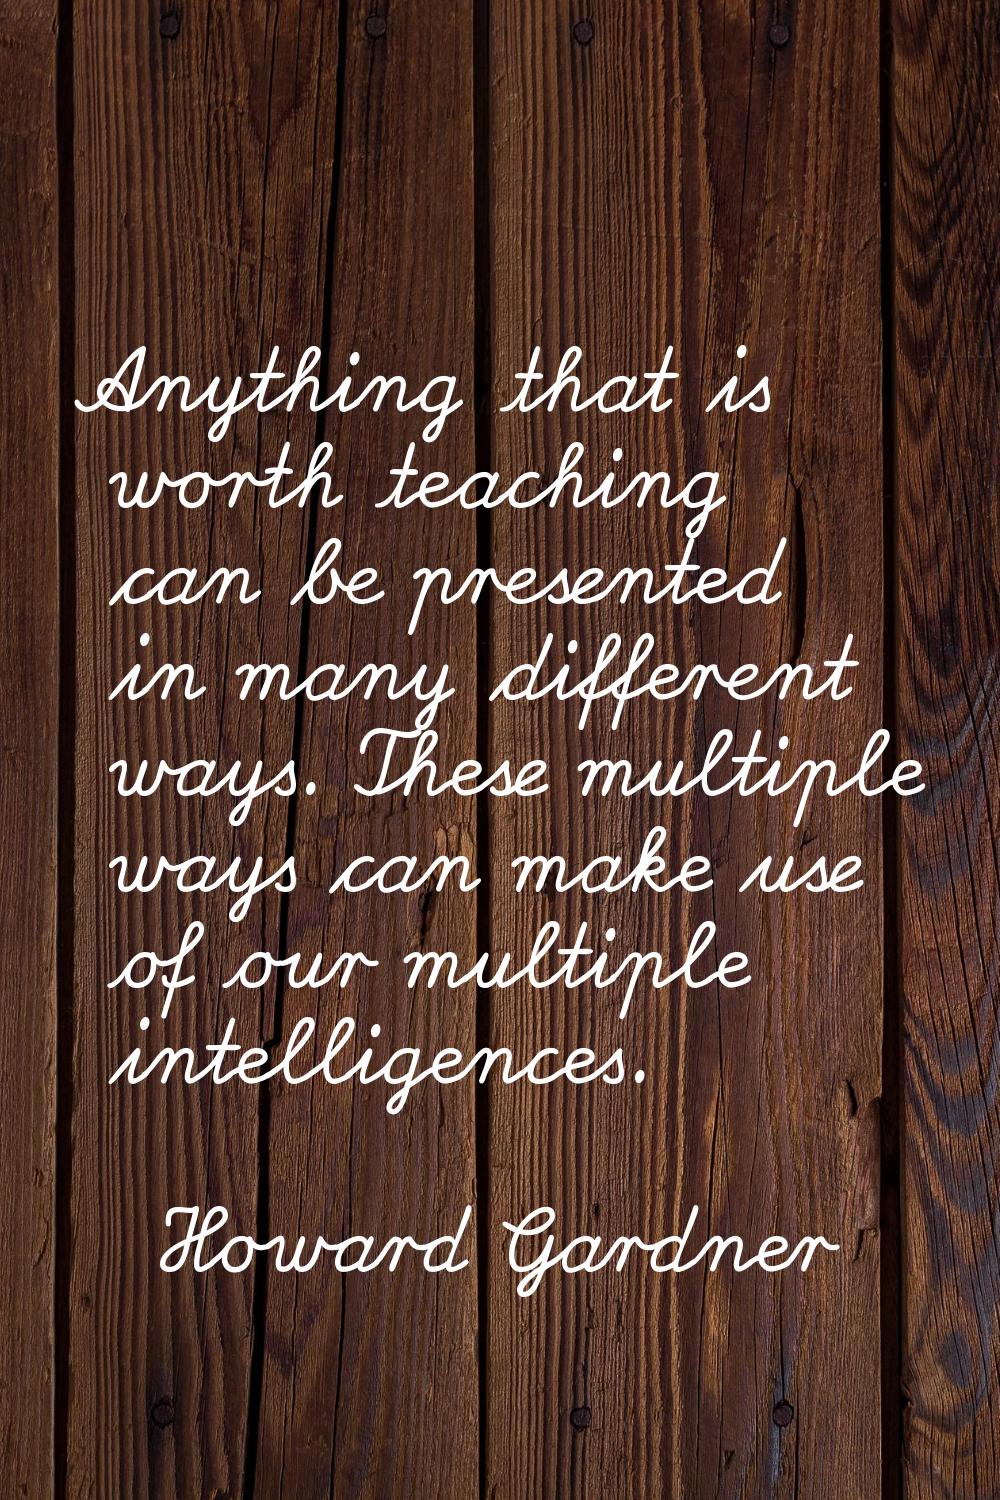 Anything that is worth teaching can be presented in many different ways. These multiple ways can ma